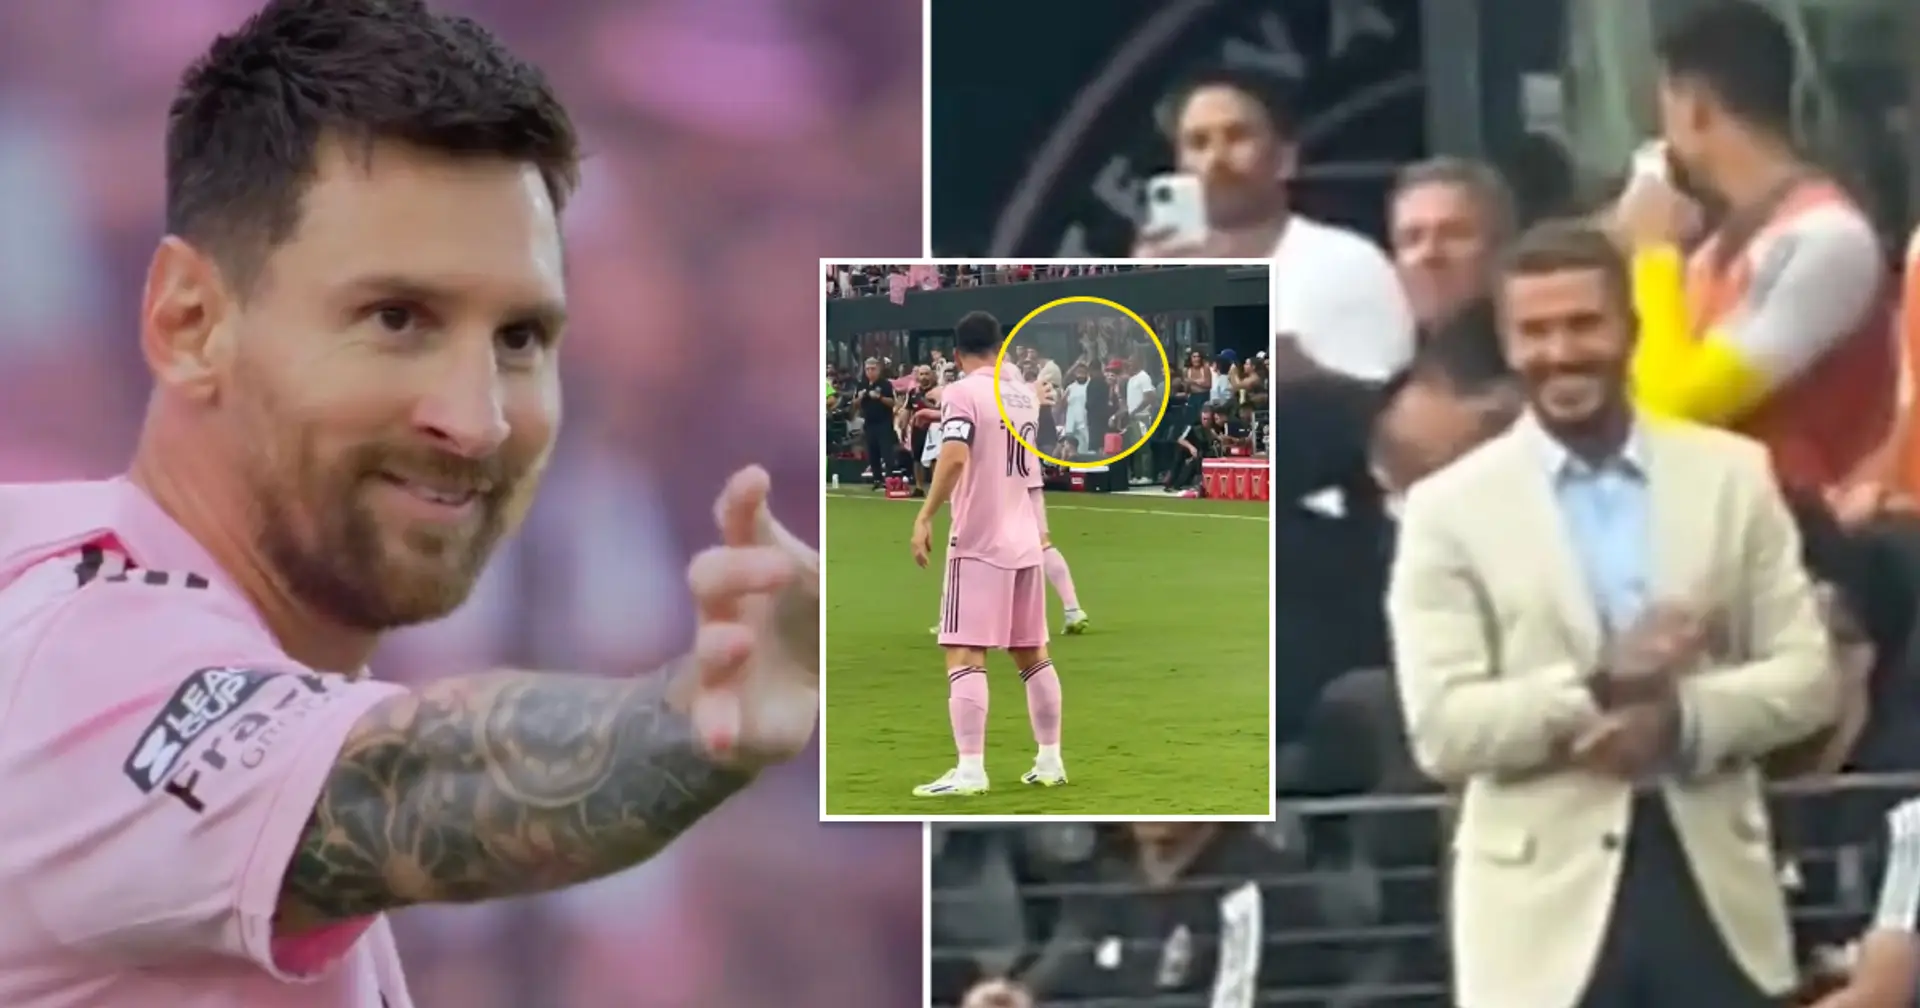 Spotted: Messi hits 'Hold my beer' celebration, dedicates it to Beckham